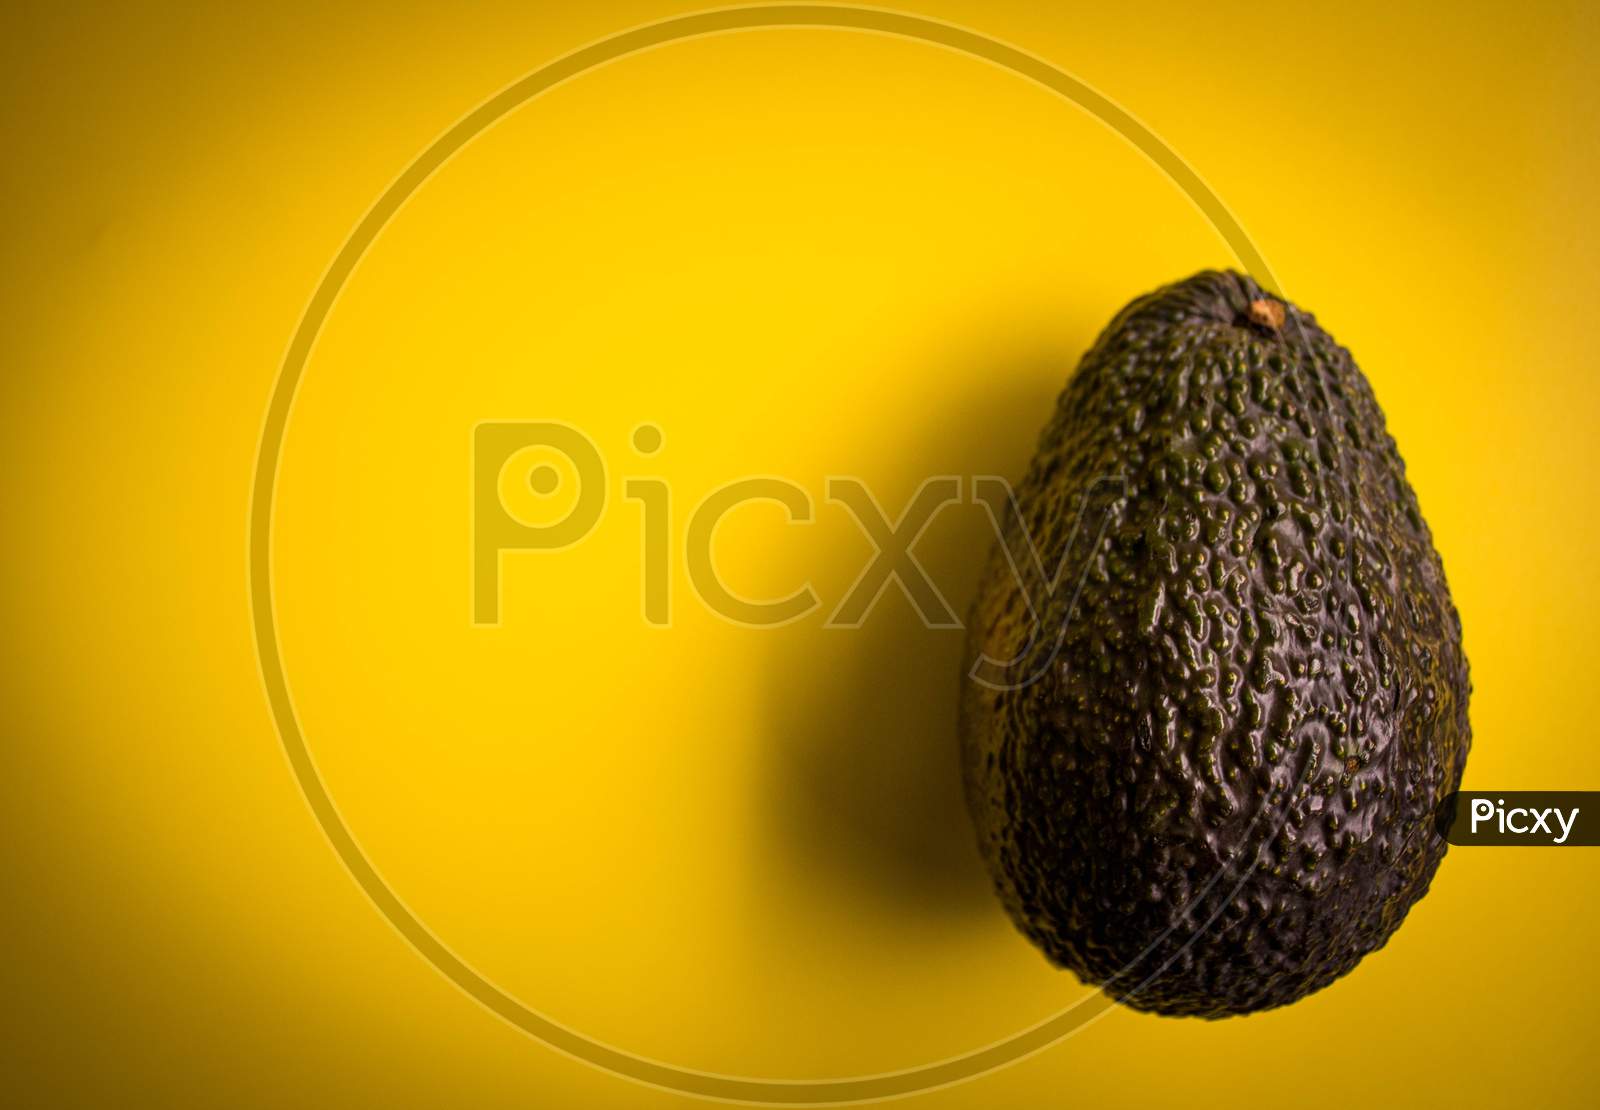 A Different Kind Of Avocado